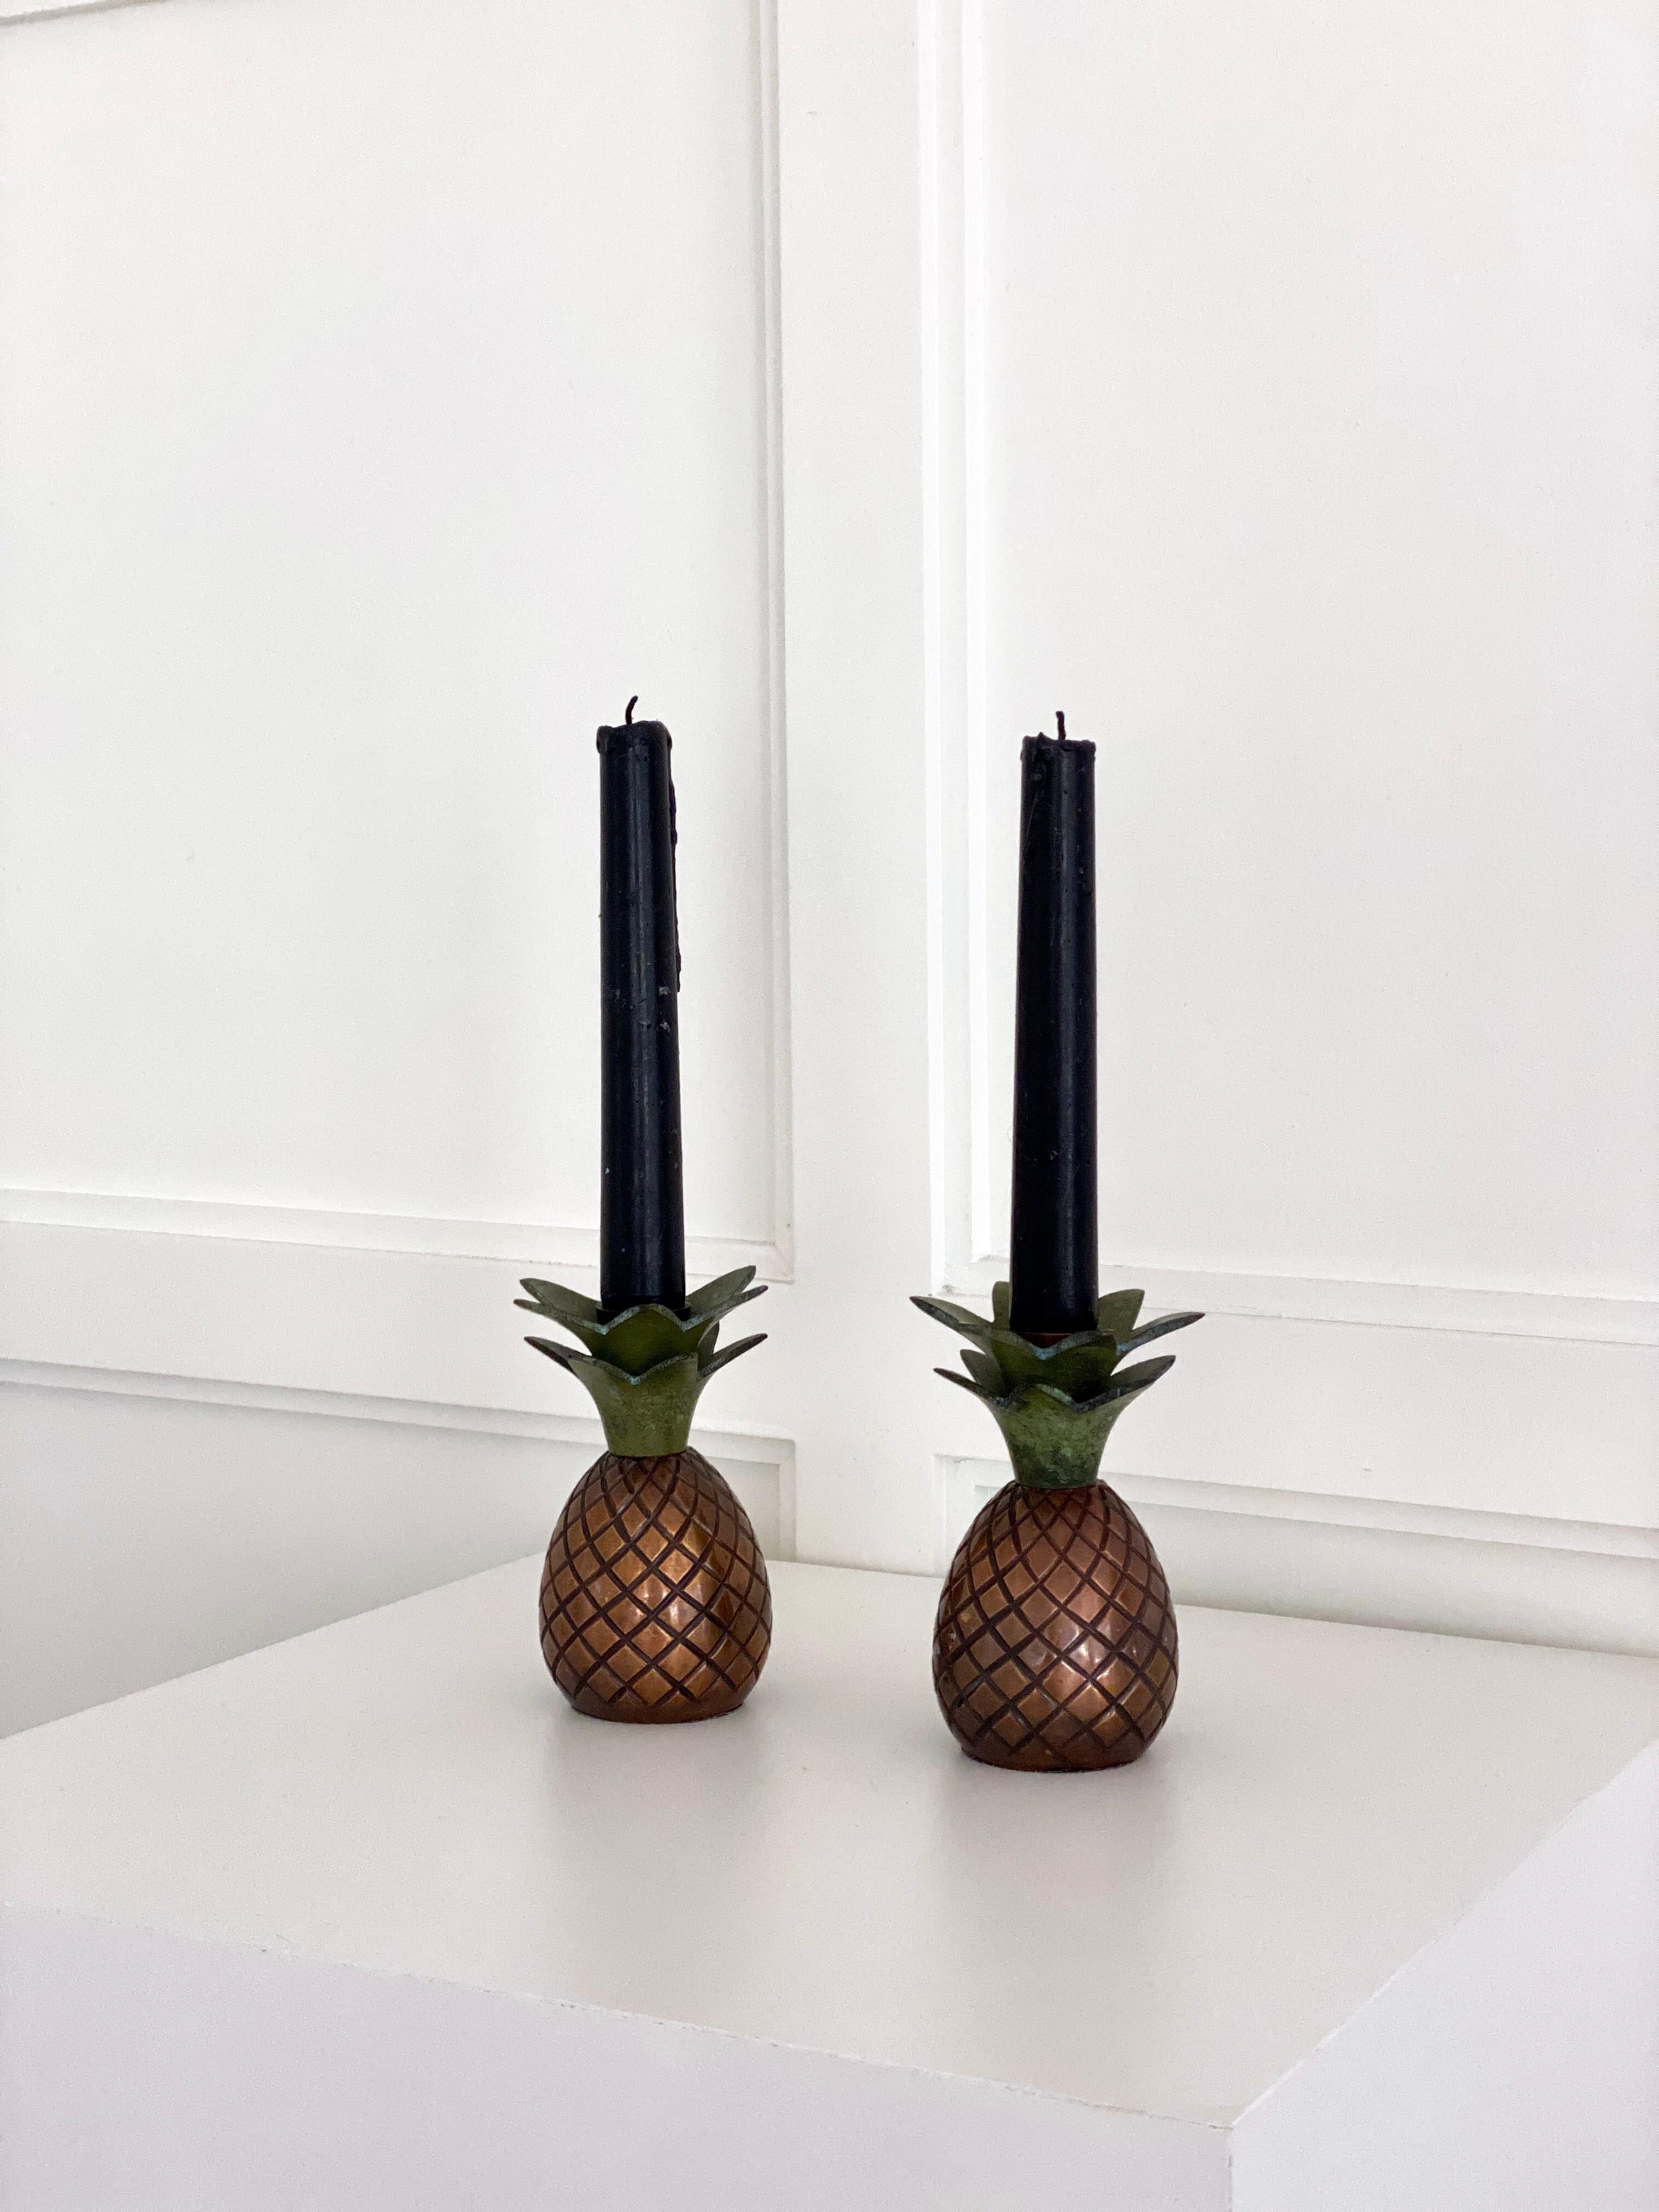 American Mid Century Modern Brass Pineapple Candle Holders - a Pair